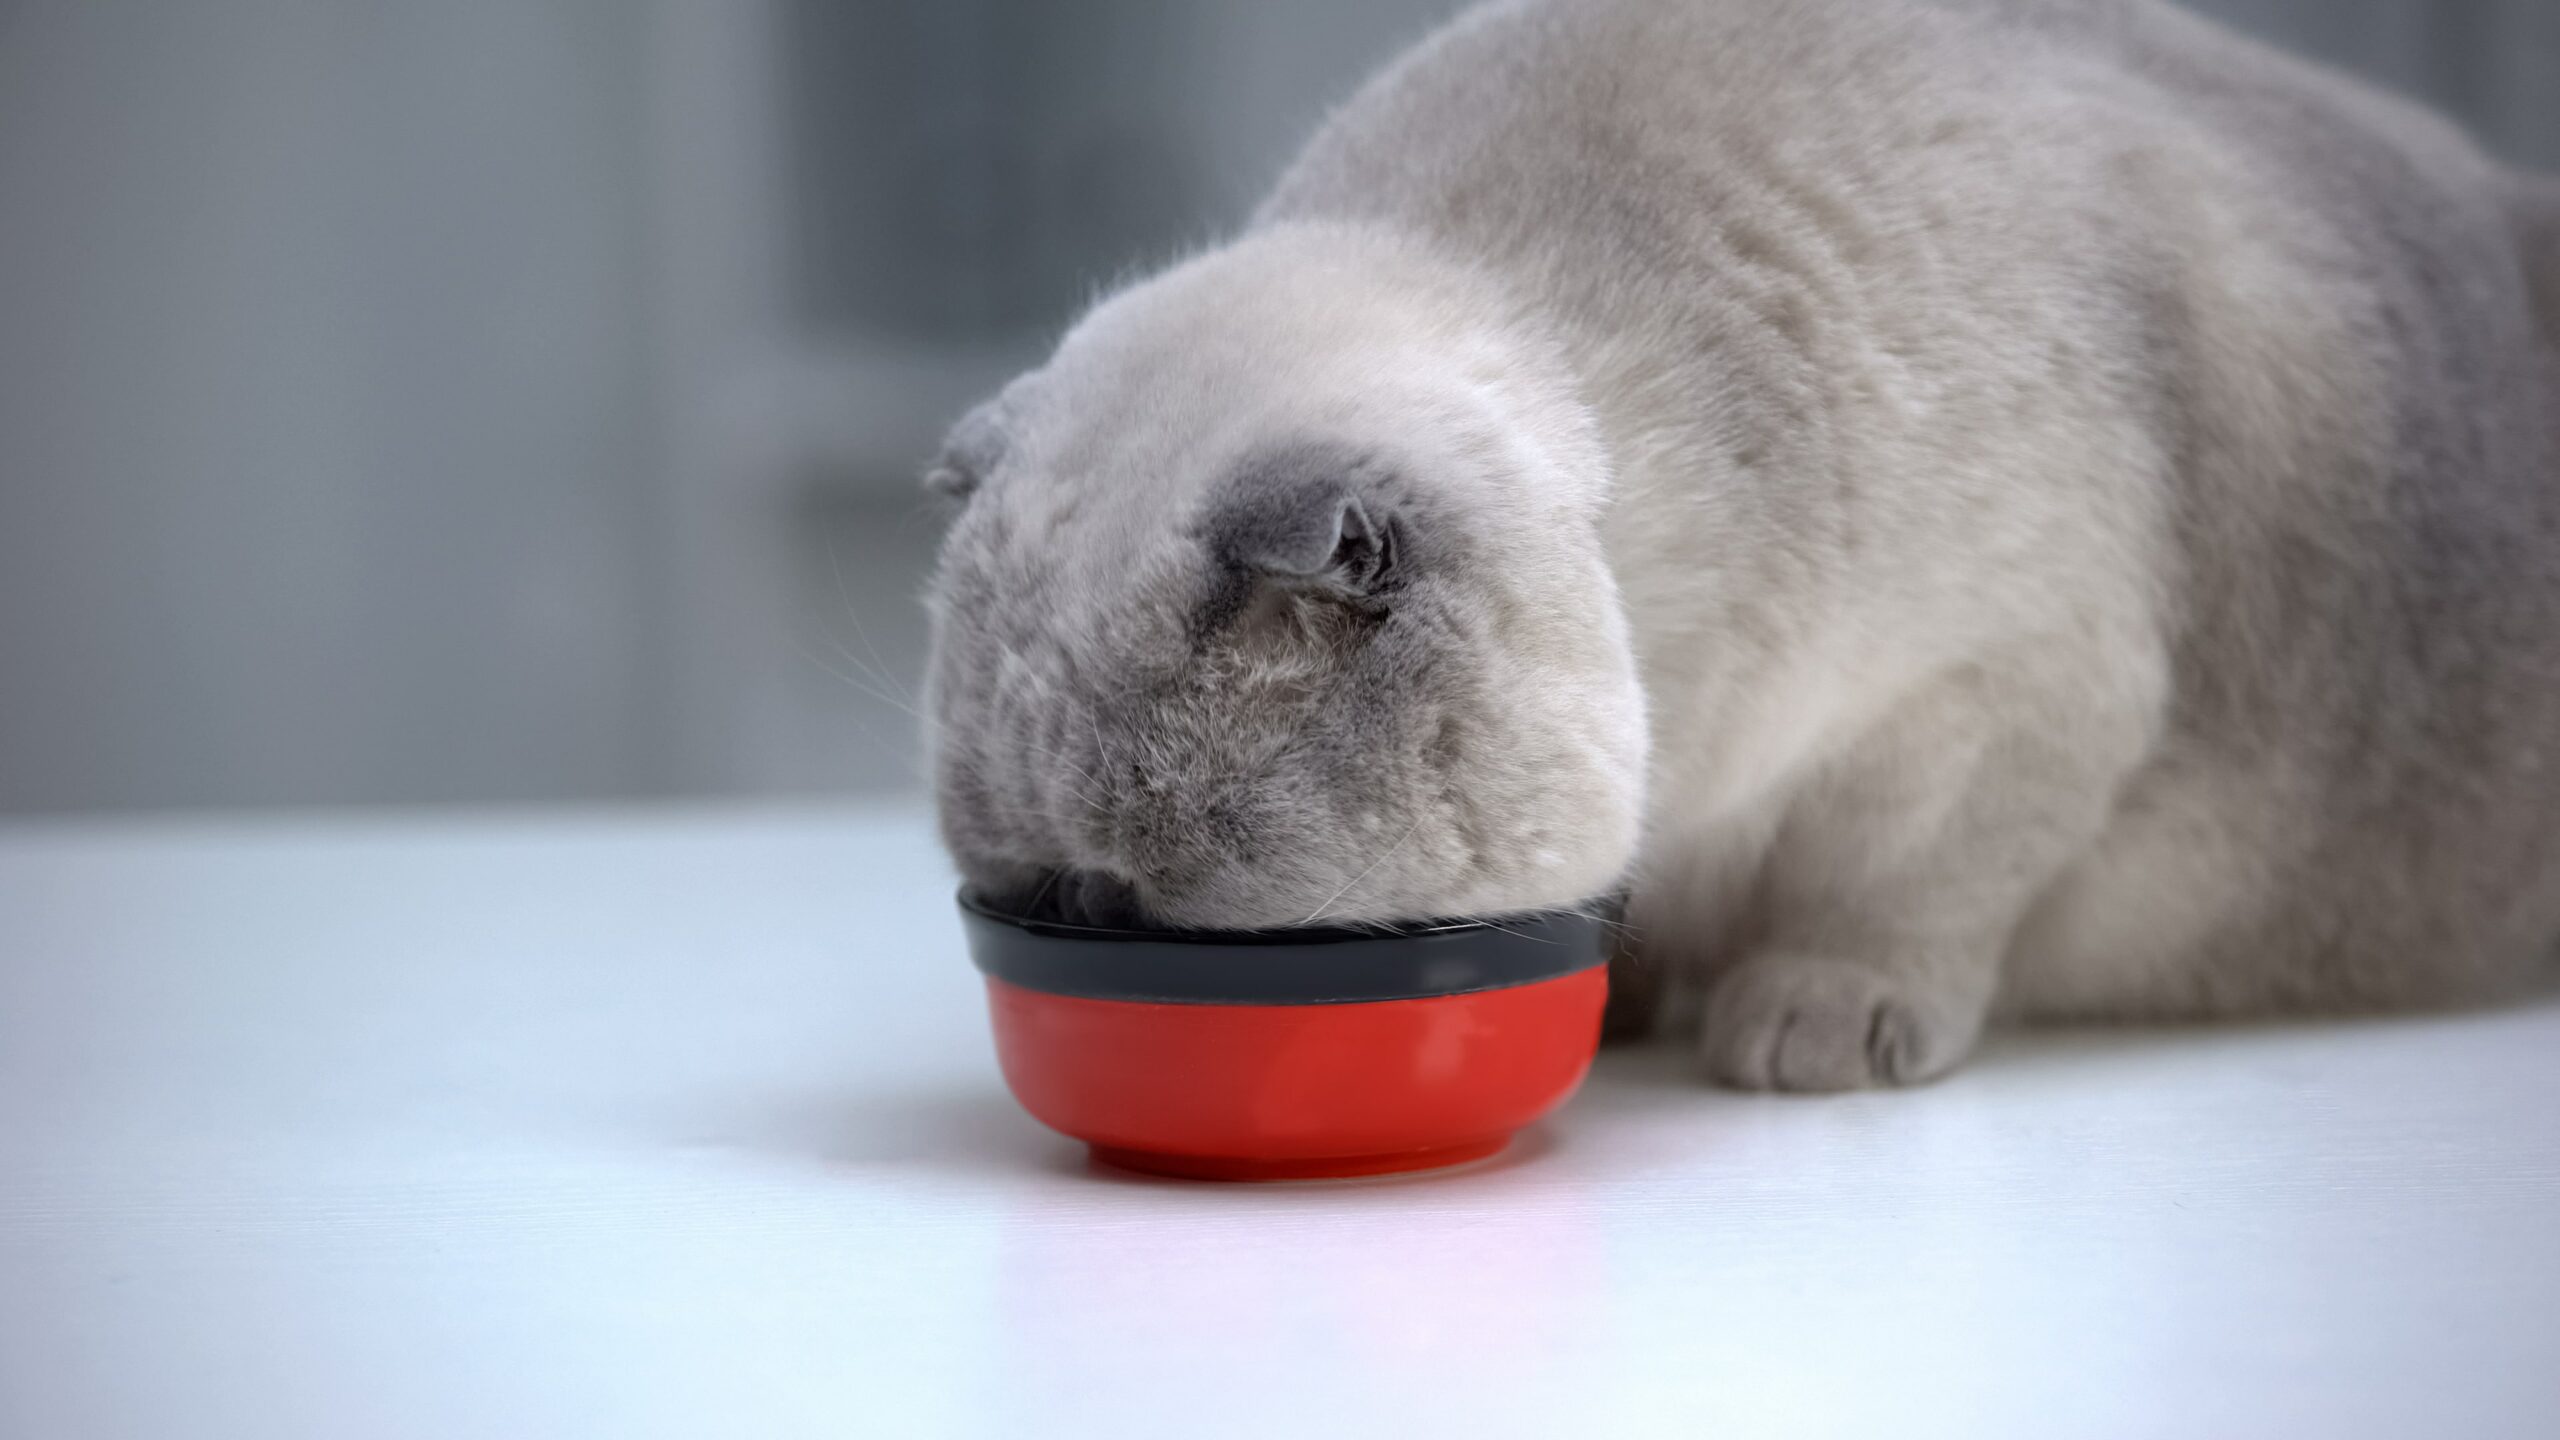 A cat eating in a red black bowl